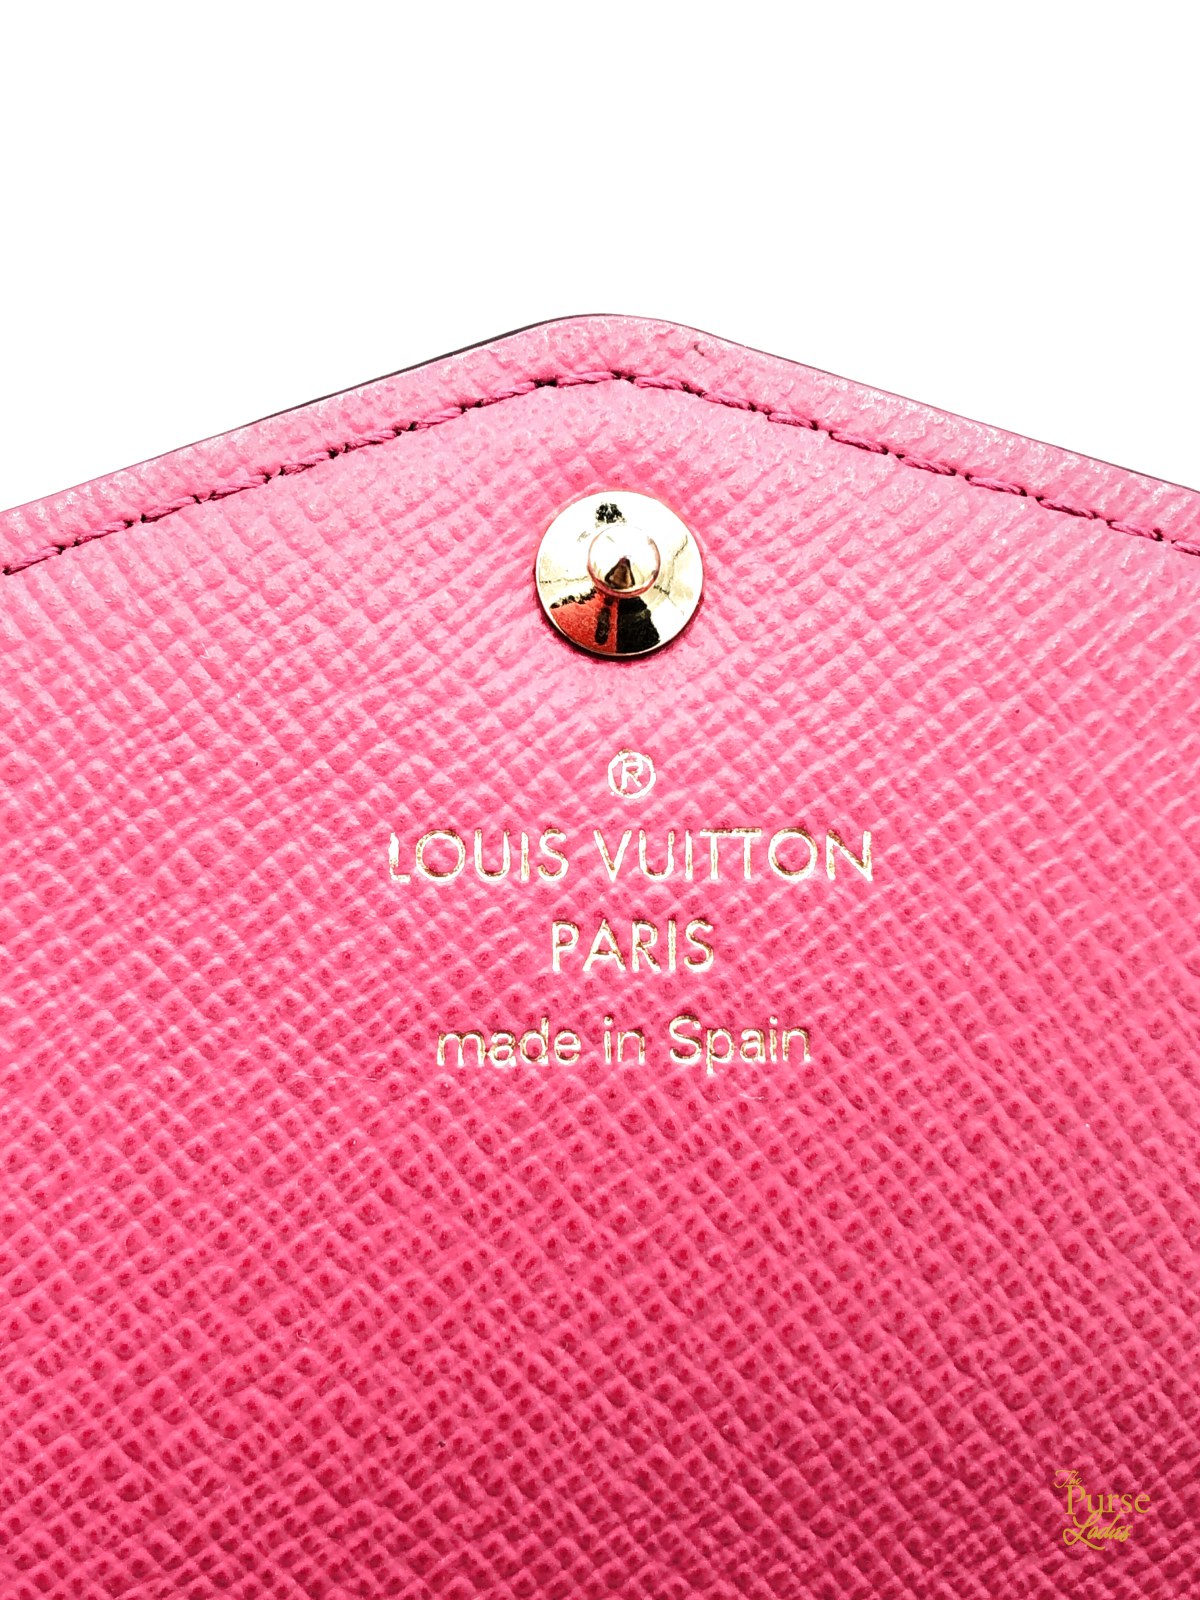 Authentic Louis Vuitton Bags, Shoes, and Accessories – The Purse Ladies